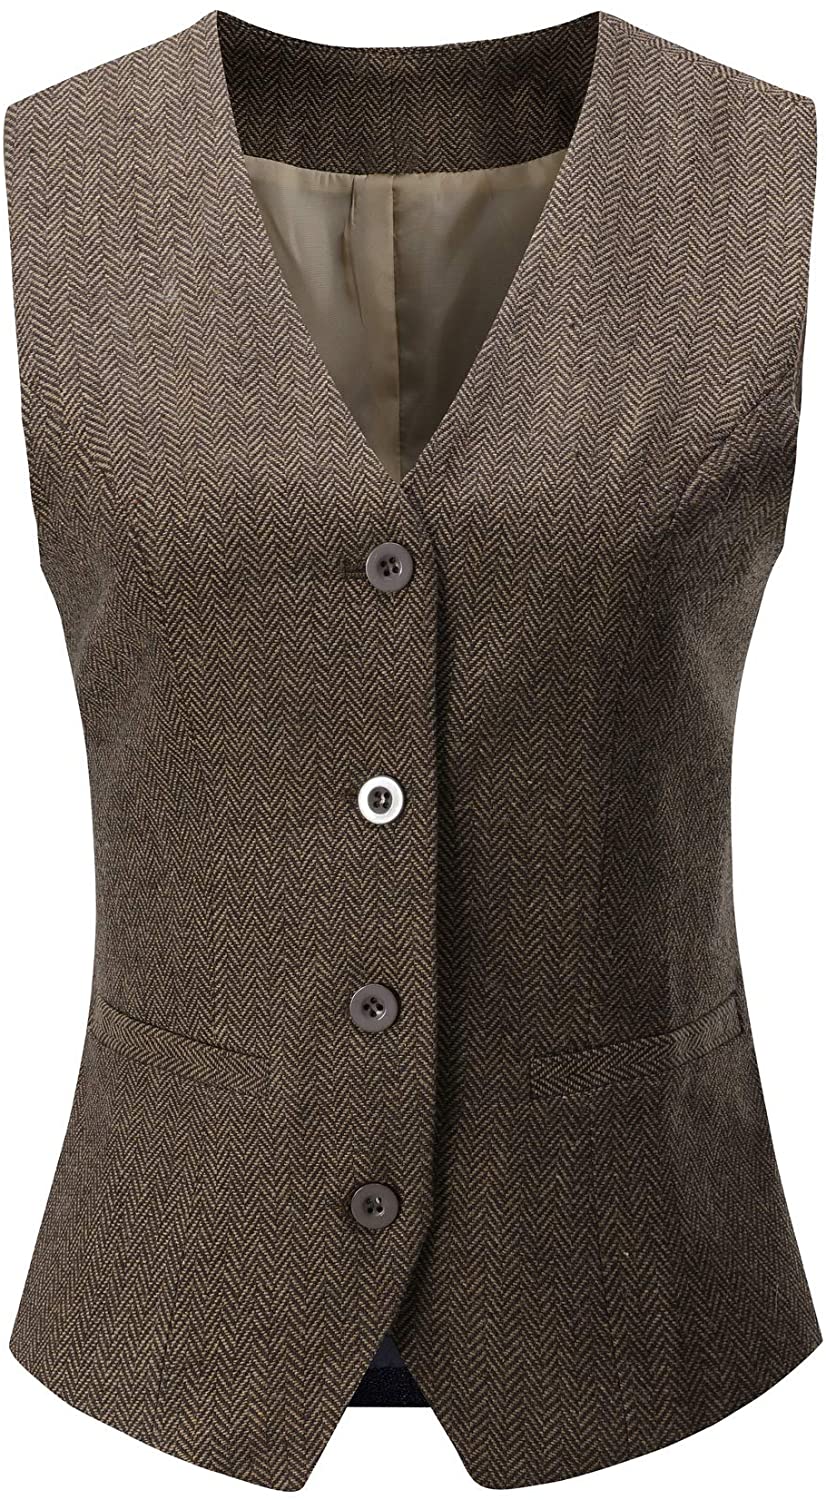 Foucome Womens V-Neck Suit Vest Two Button Formal Business Tuxedo Waistcoat Sleeveless Jacket Coat Top